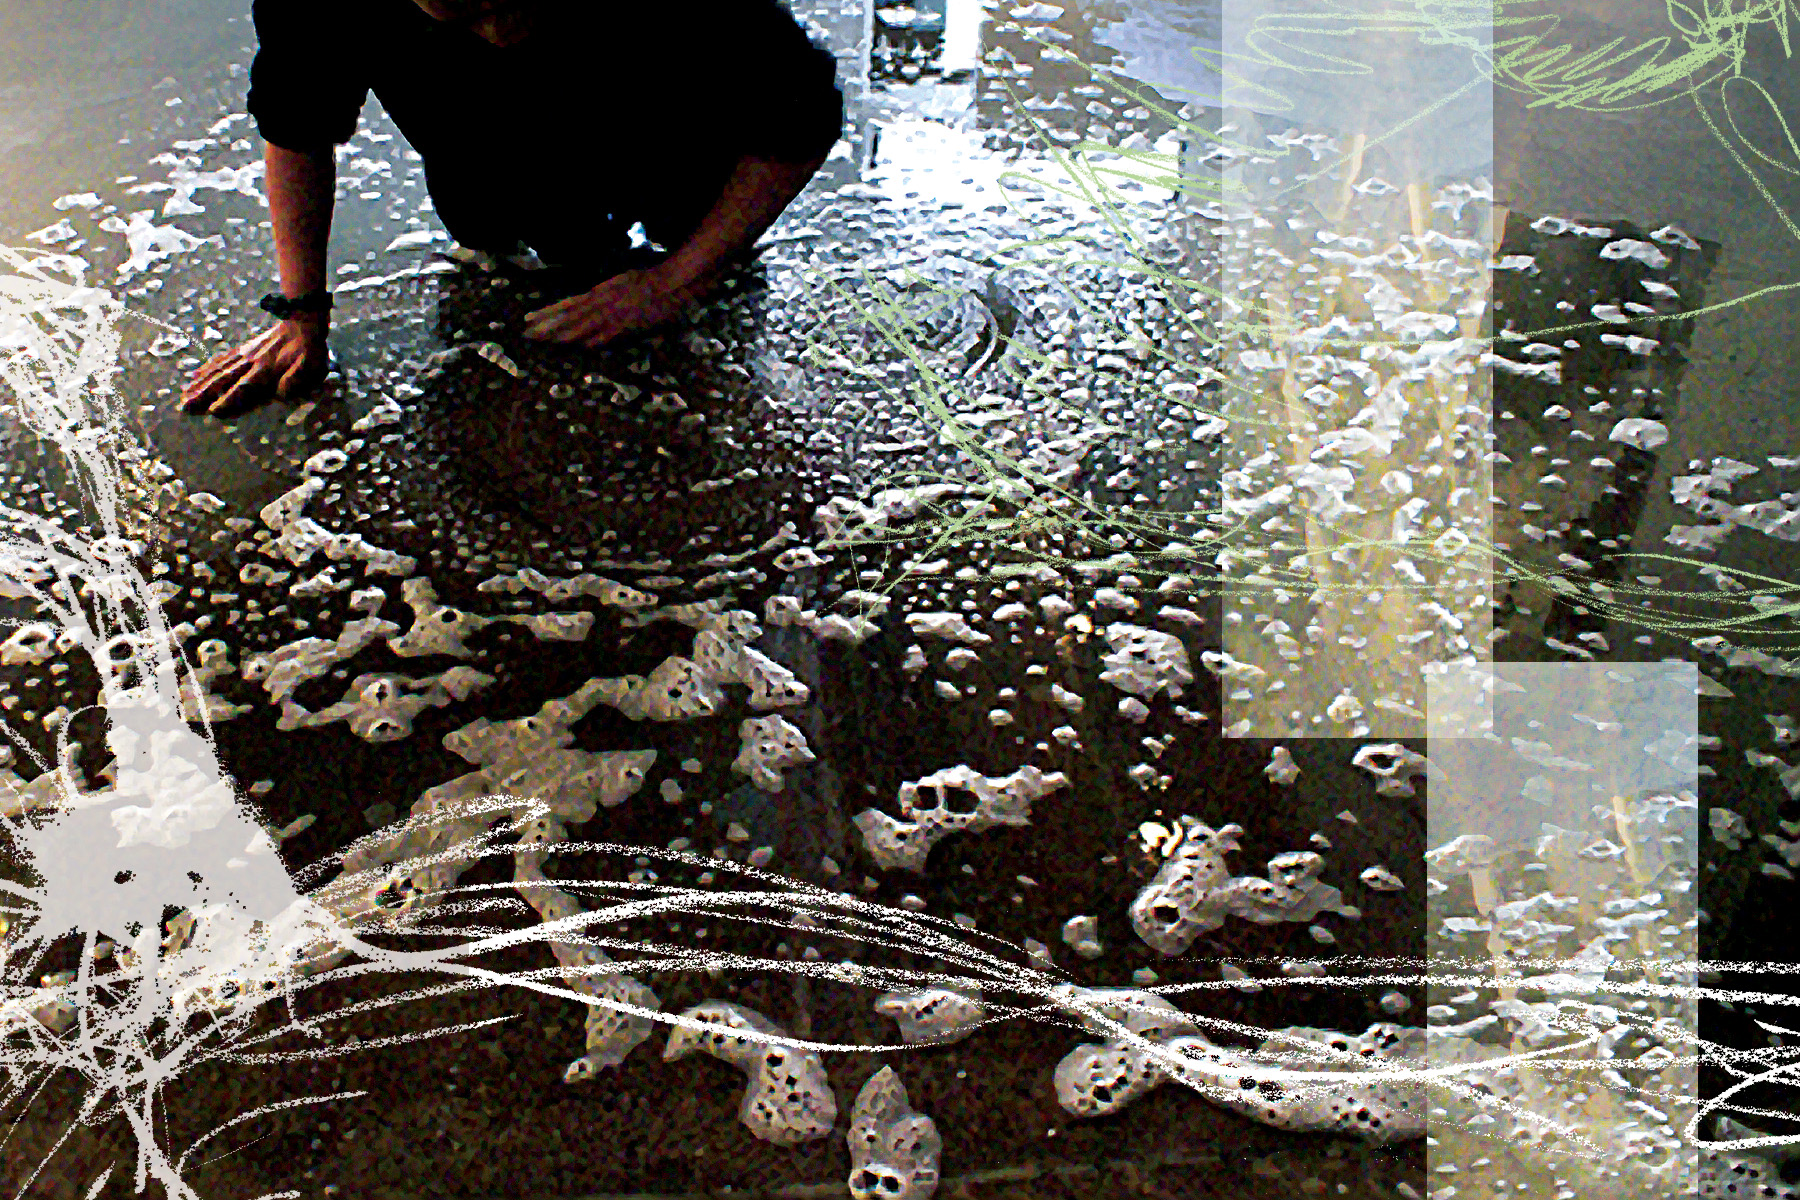 A photograph of a person on their knees on a soapy floor with lines rendered digitally on top of the image.